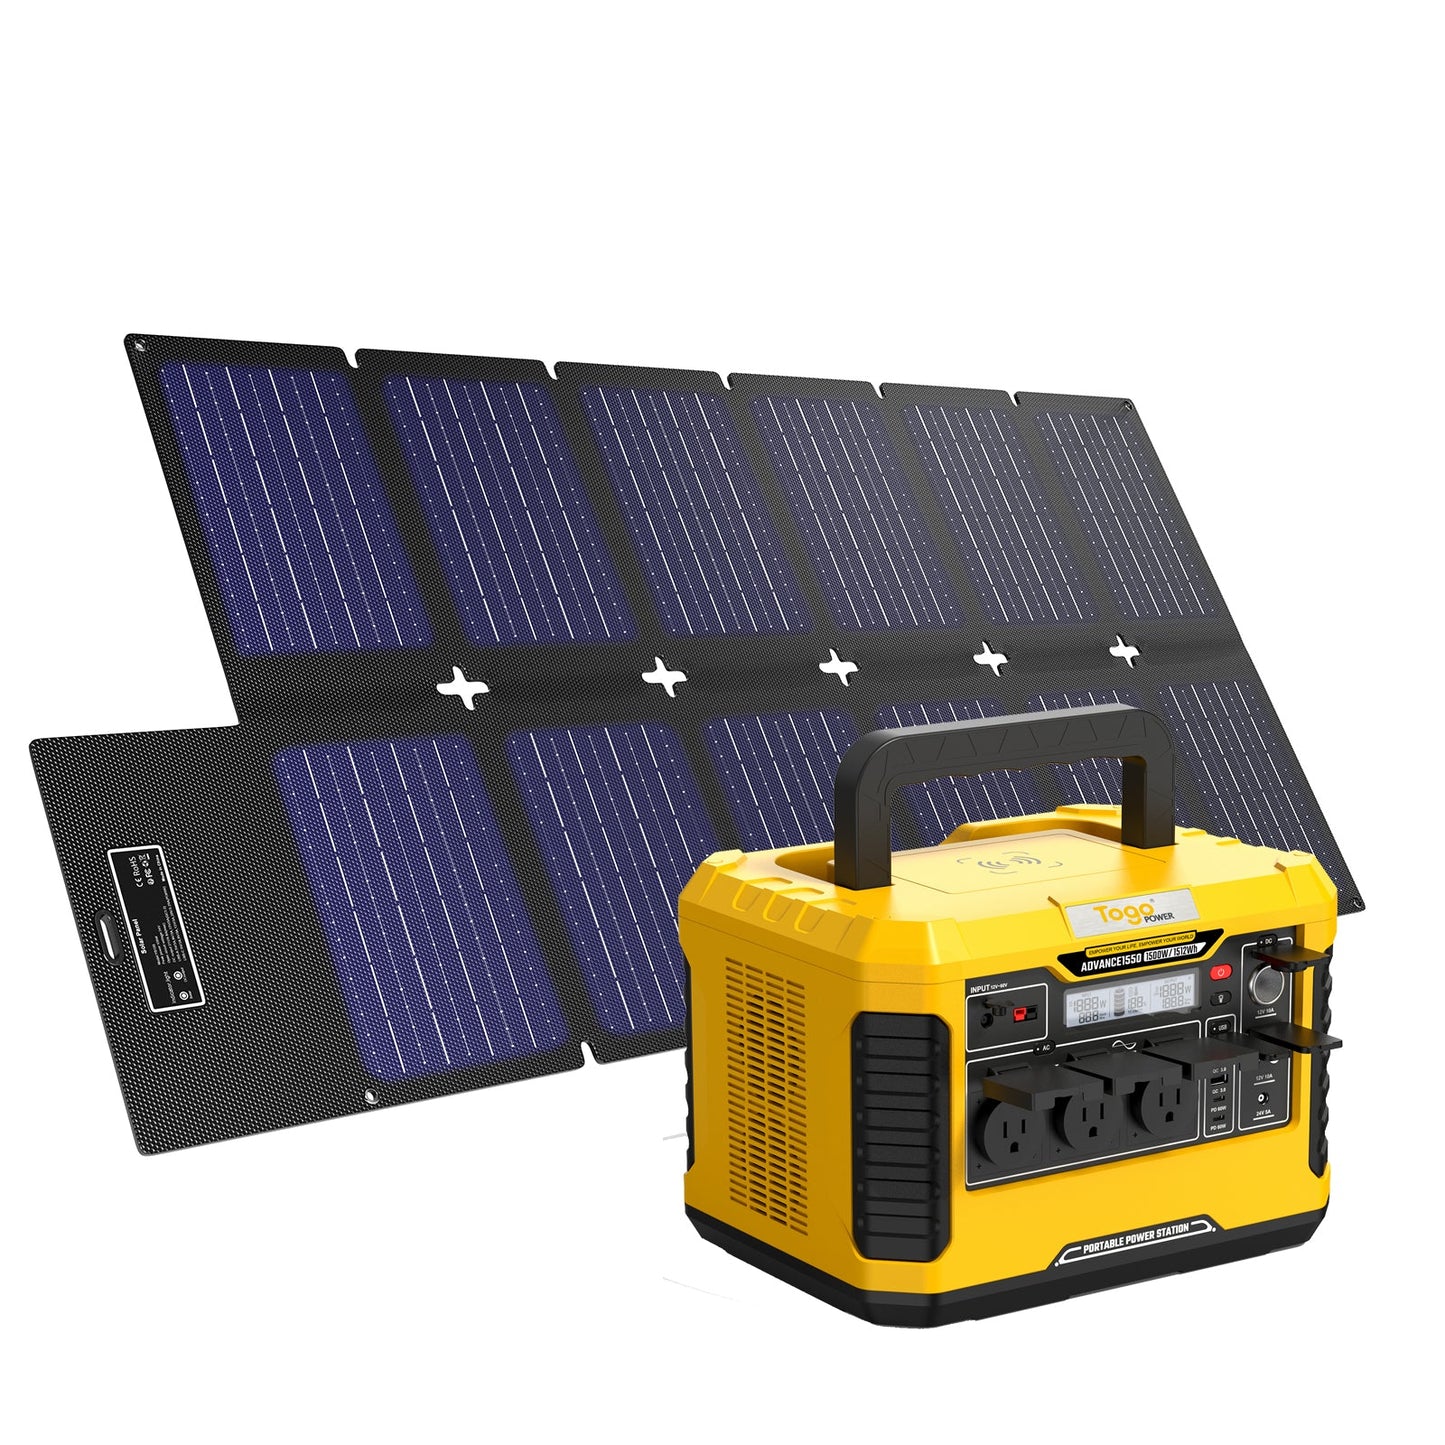 Togopower Power Station Advance1550,1512Wh with Yargopower 100W Solar Panel(YB) Included, Backup Lithium Battery for Outdoors Camping Travel Hunting Emergency